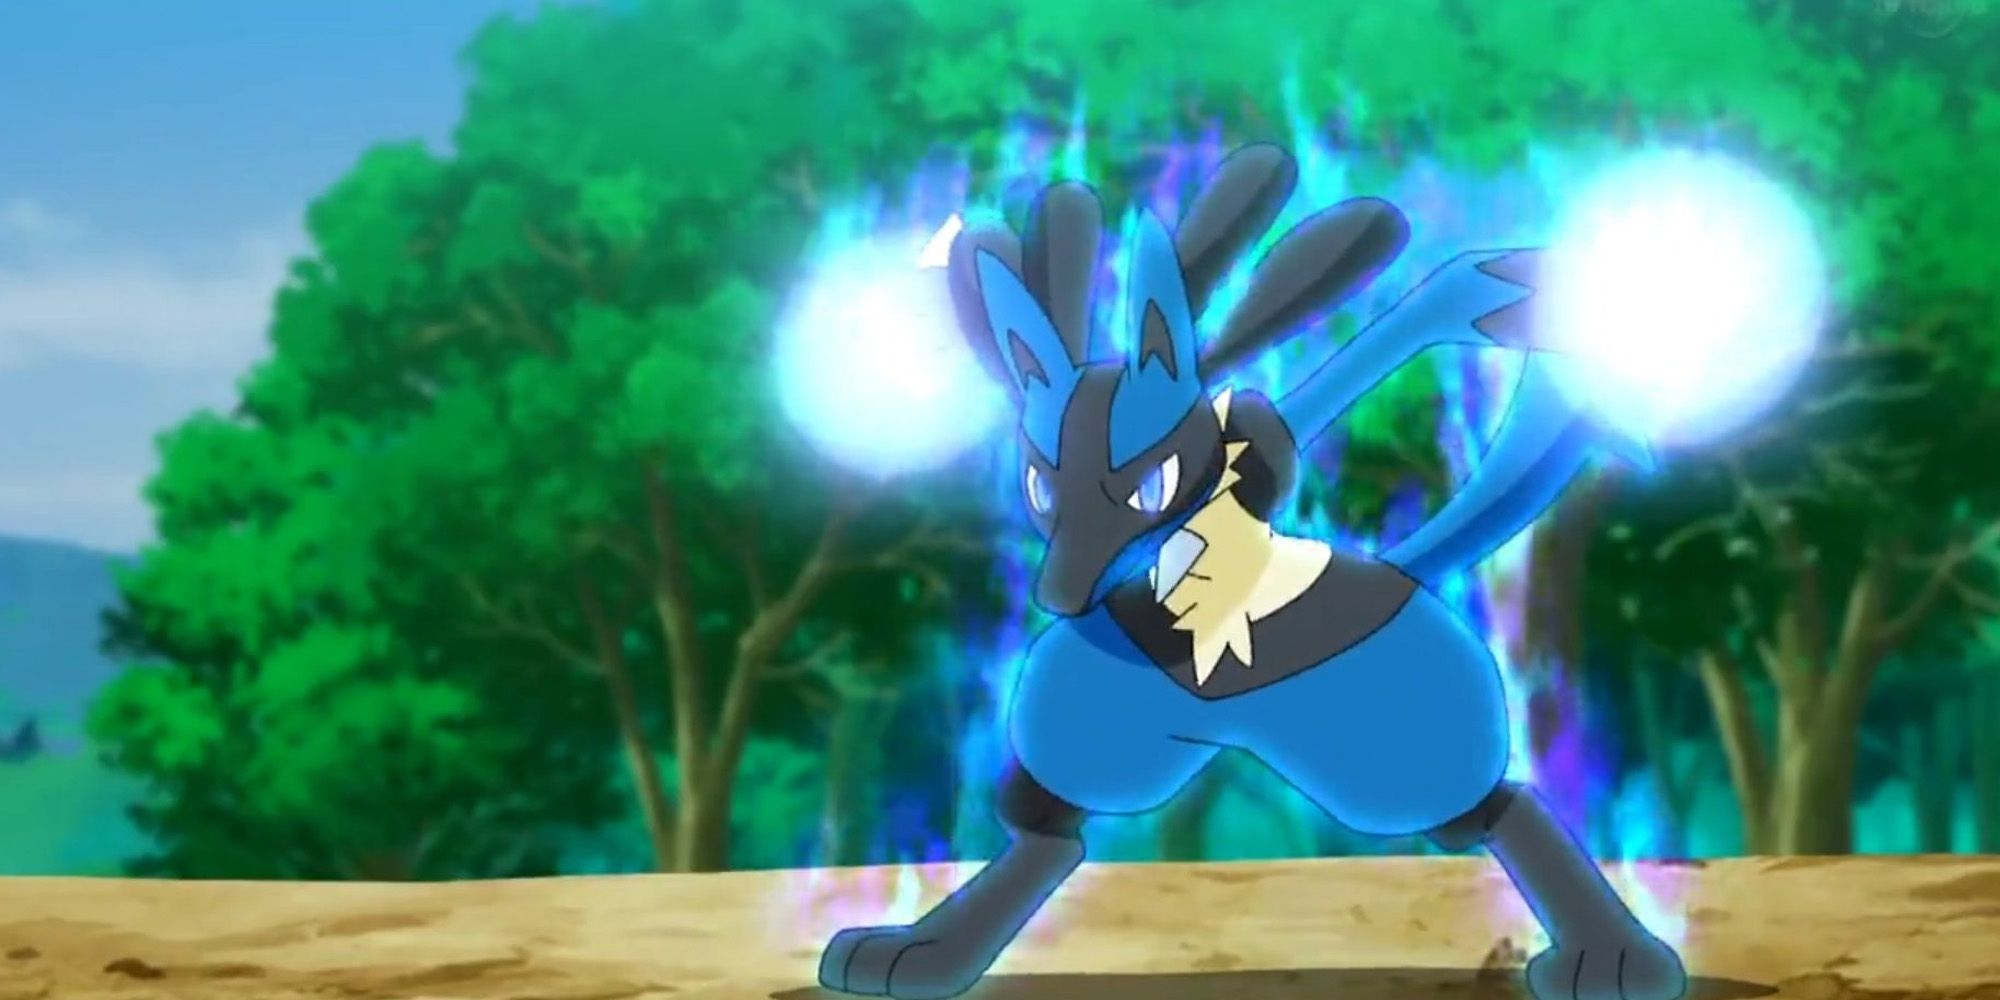 Lucario charges up an attack with a forest in the background